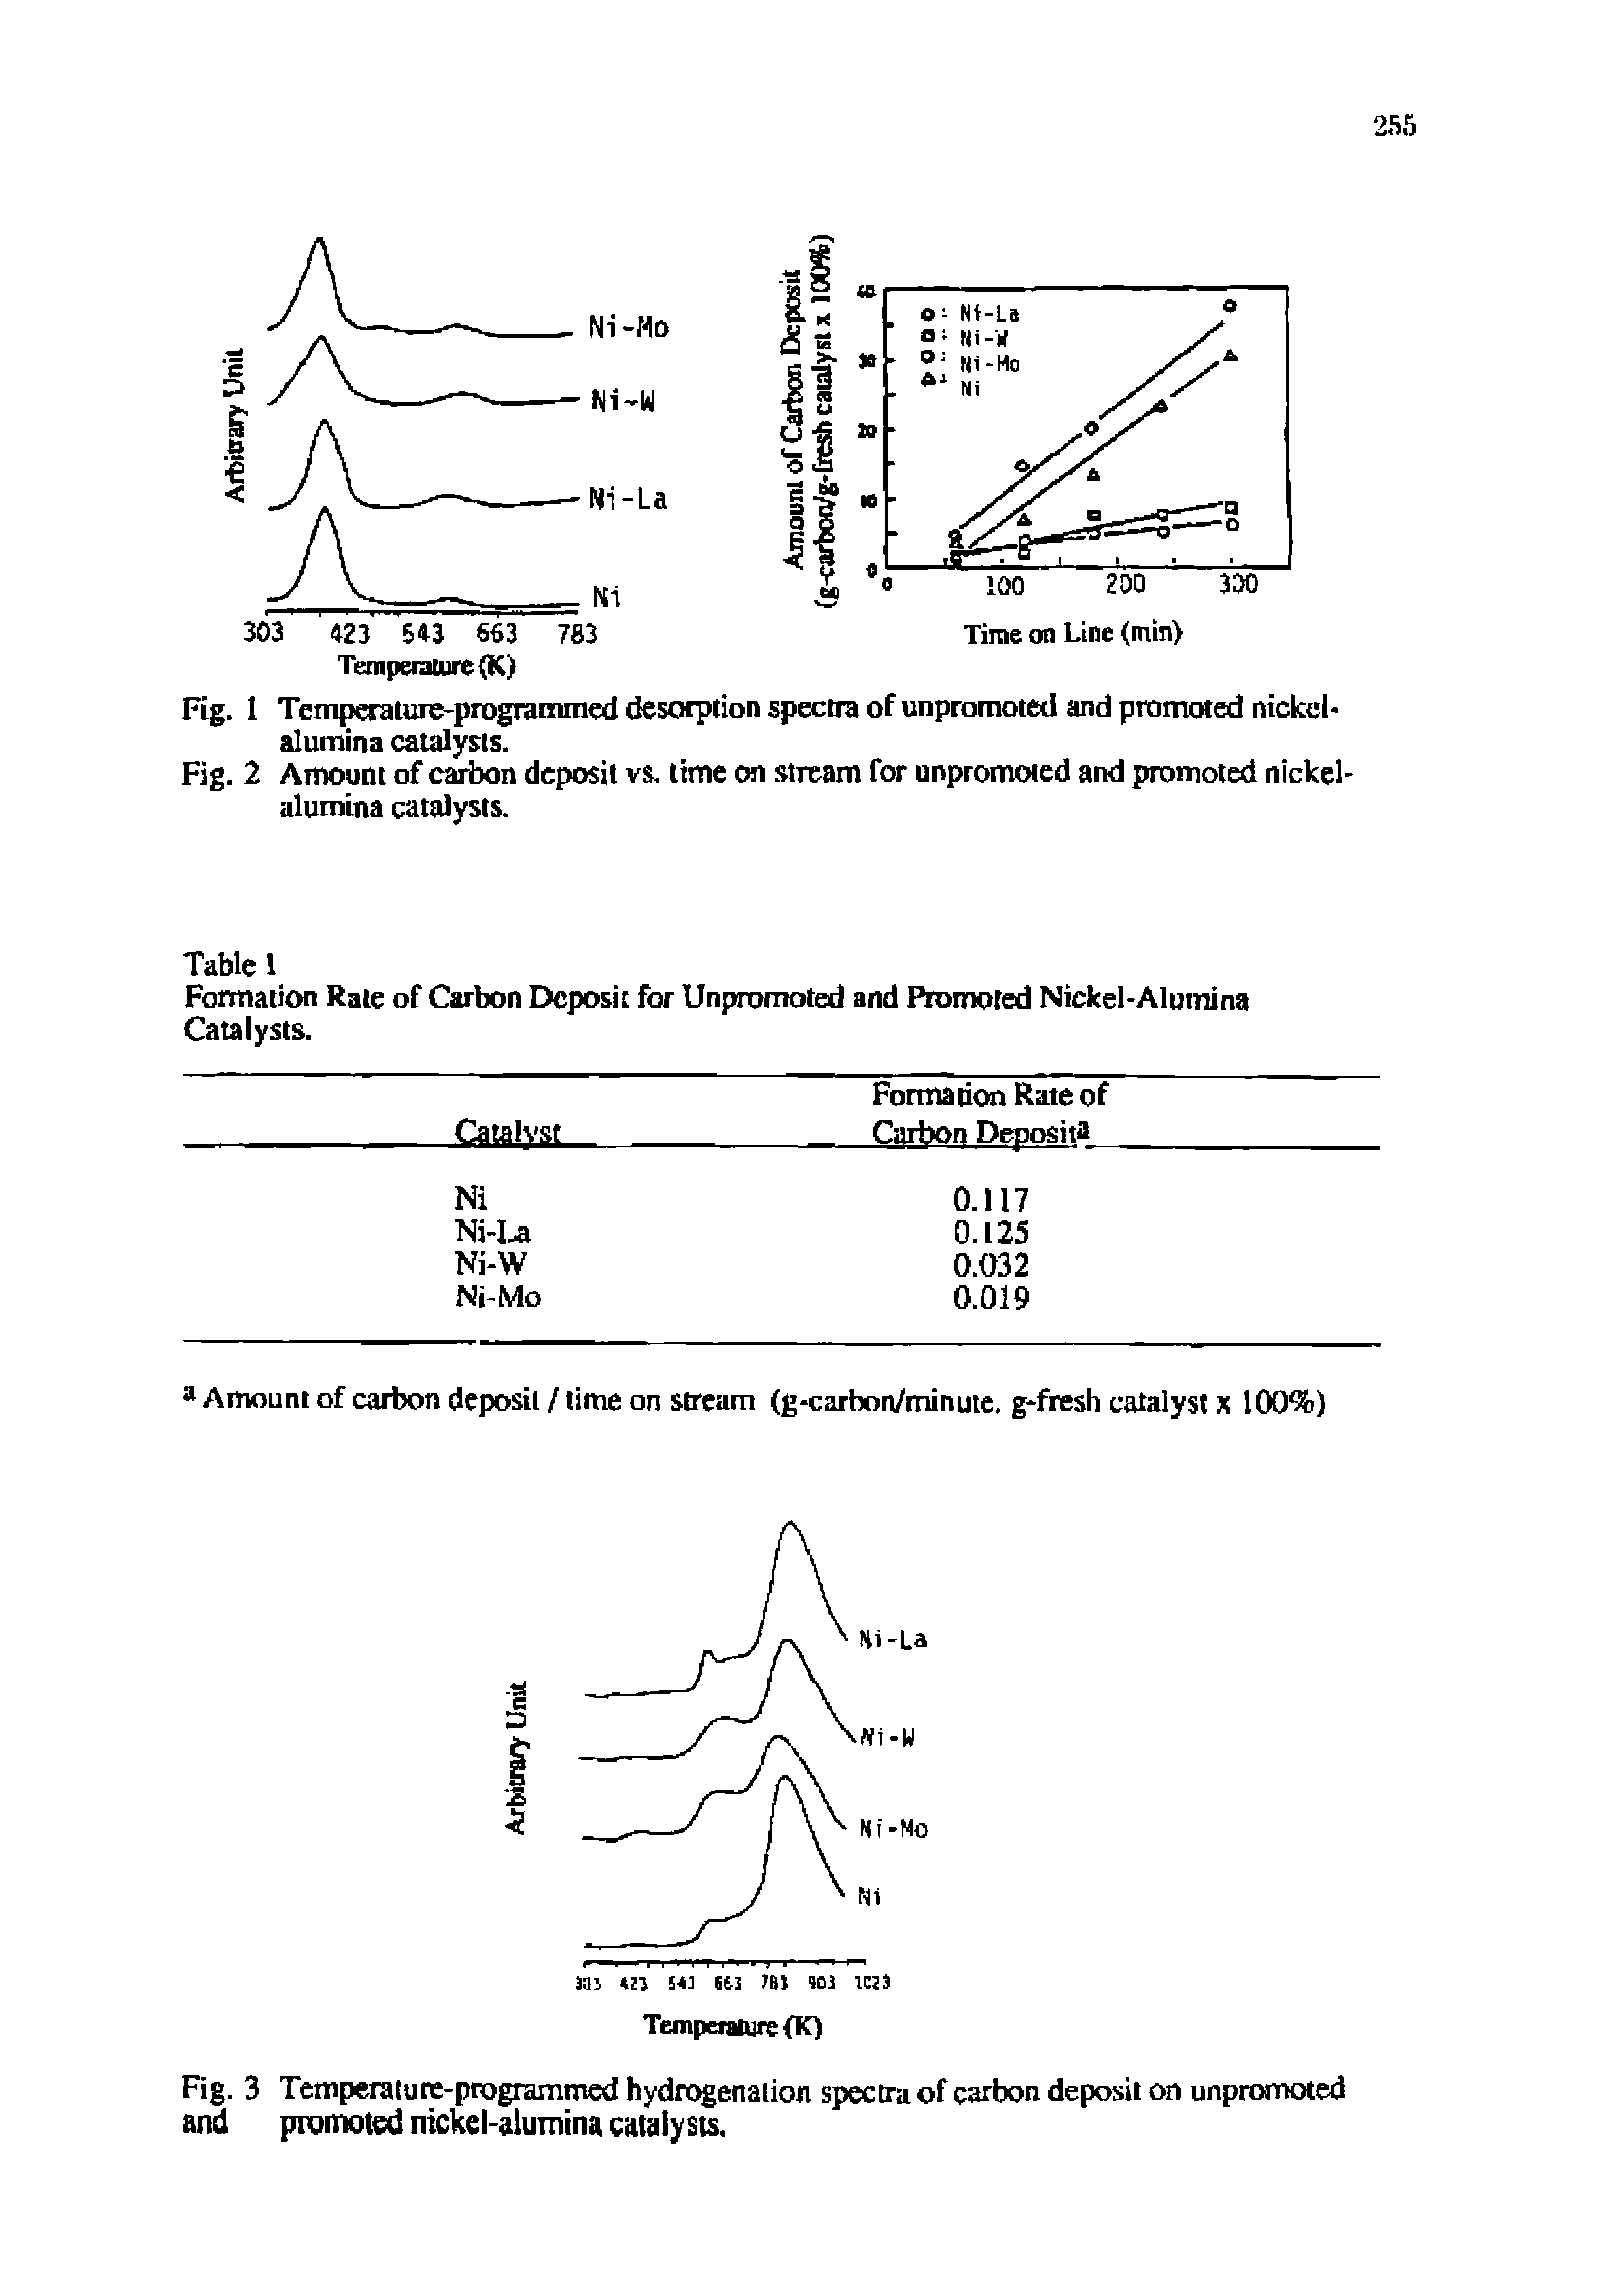 Fig. 3 Temperature-programmed hydrogenation spectra of carbon deposit on unpromoted and promoted nickel-alumina catalysts.